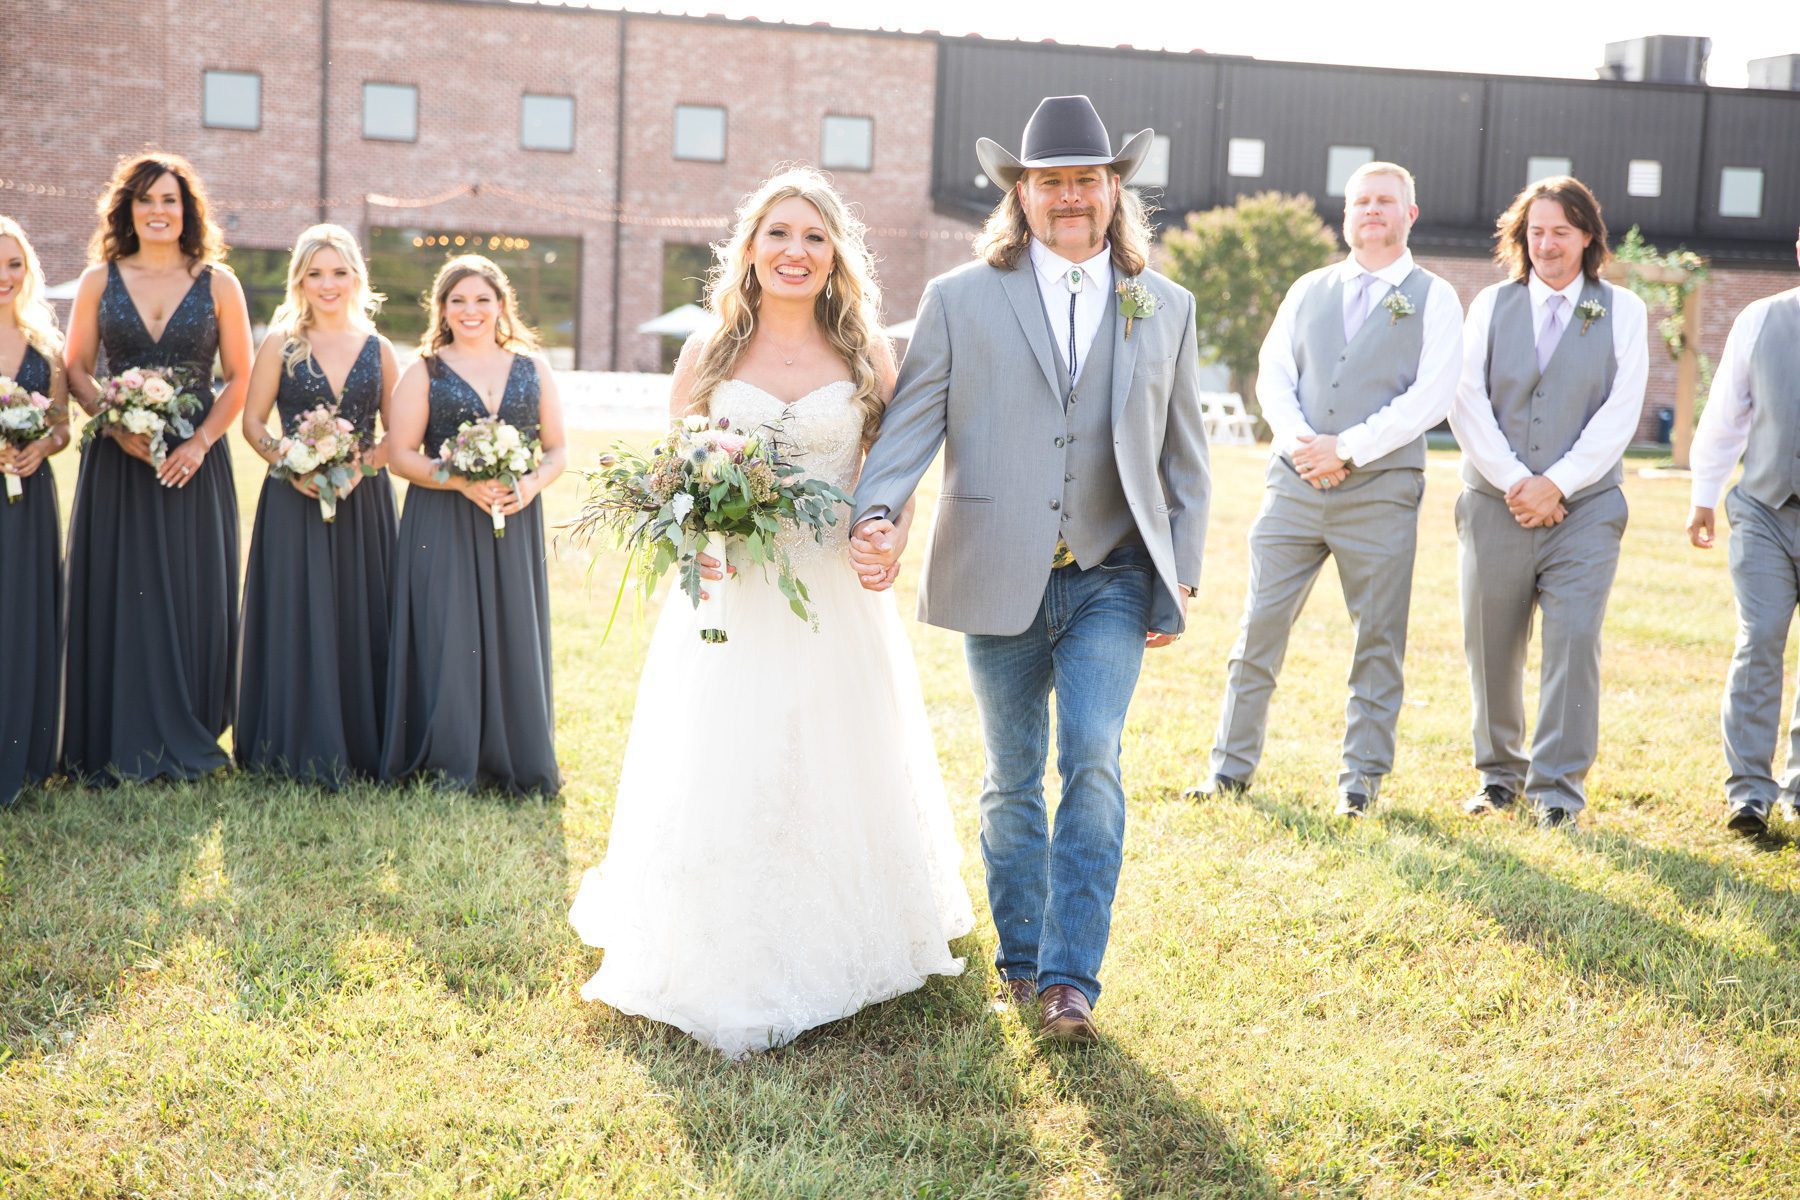 bride and groom with wedding party Old Glory Distilling Co. Clarksville, TN 